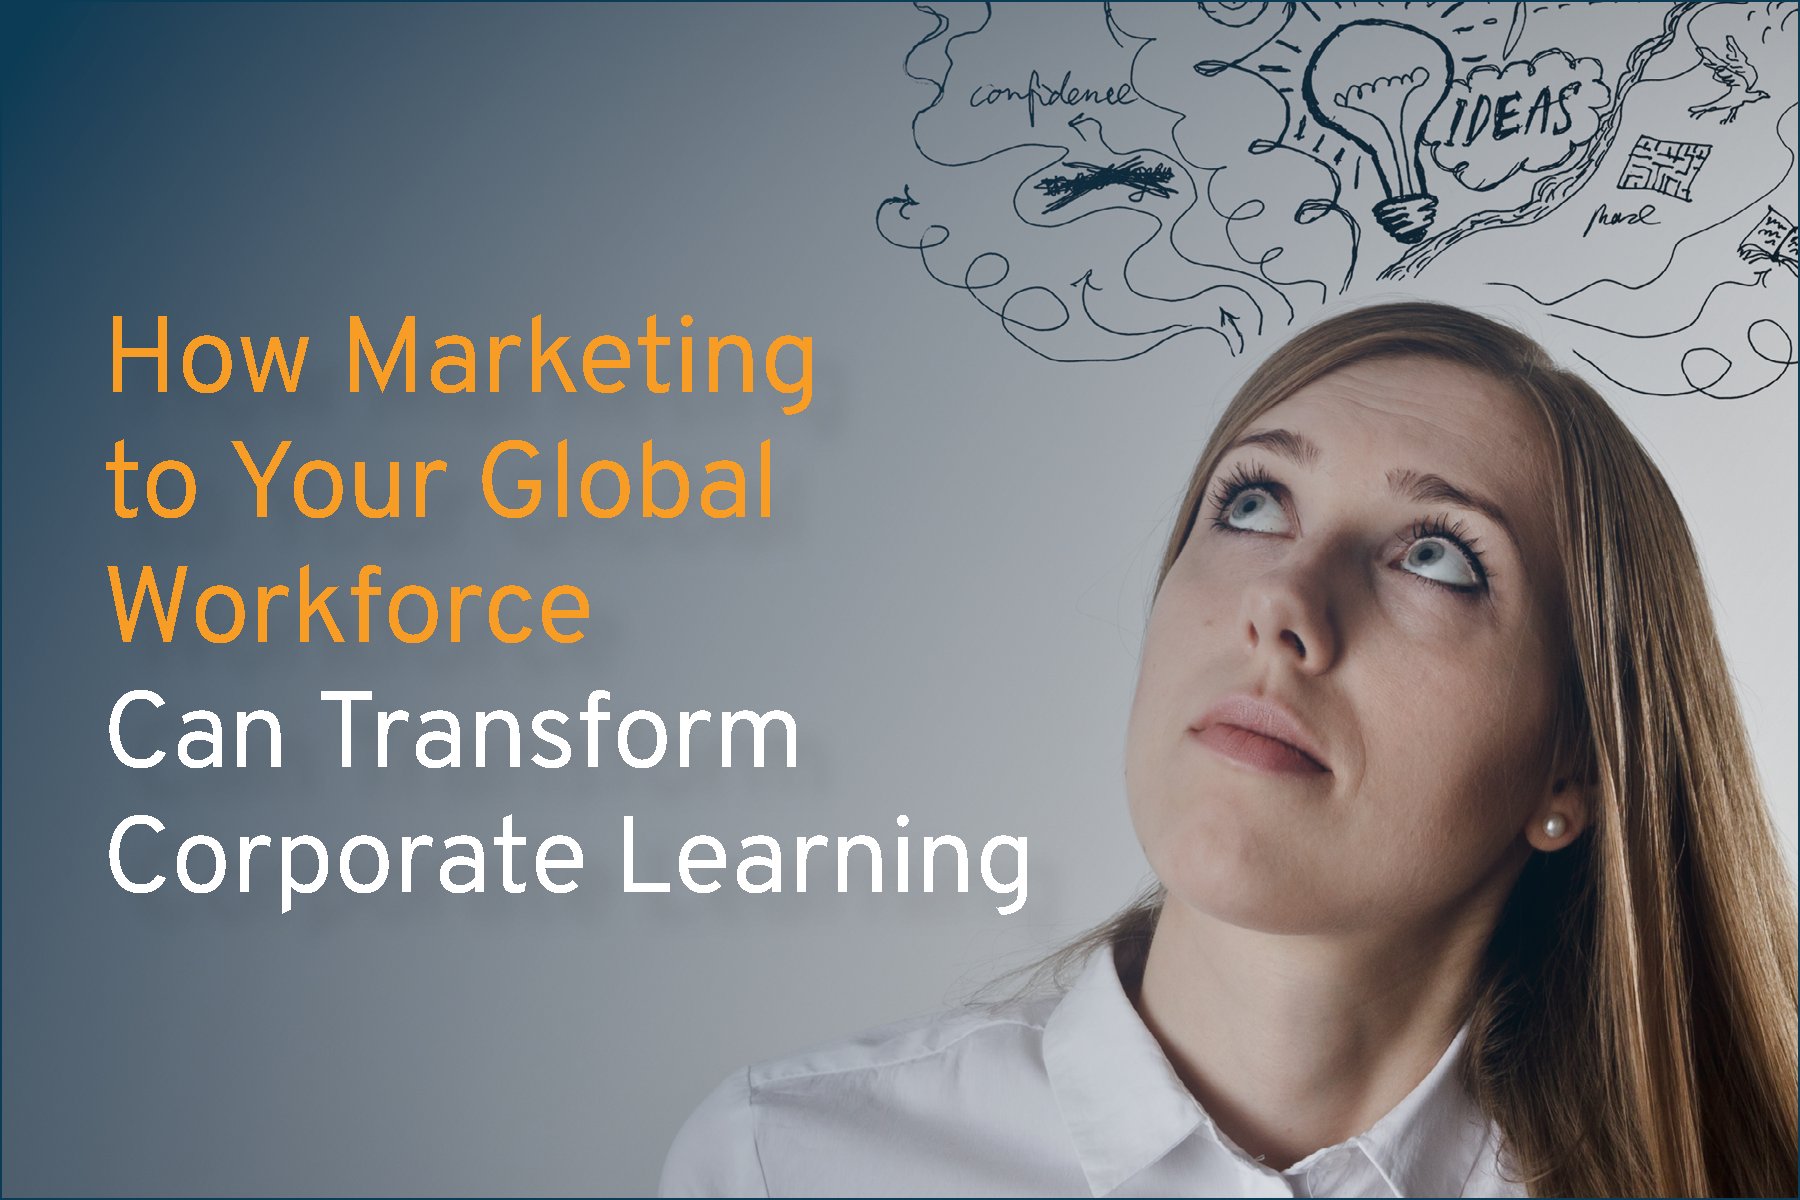 Marketing your corporate learning